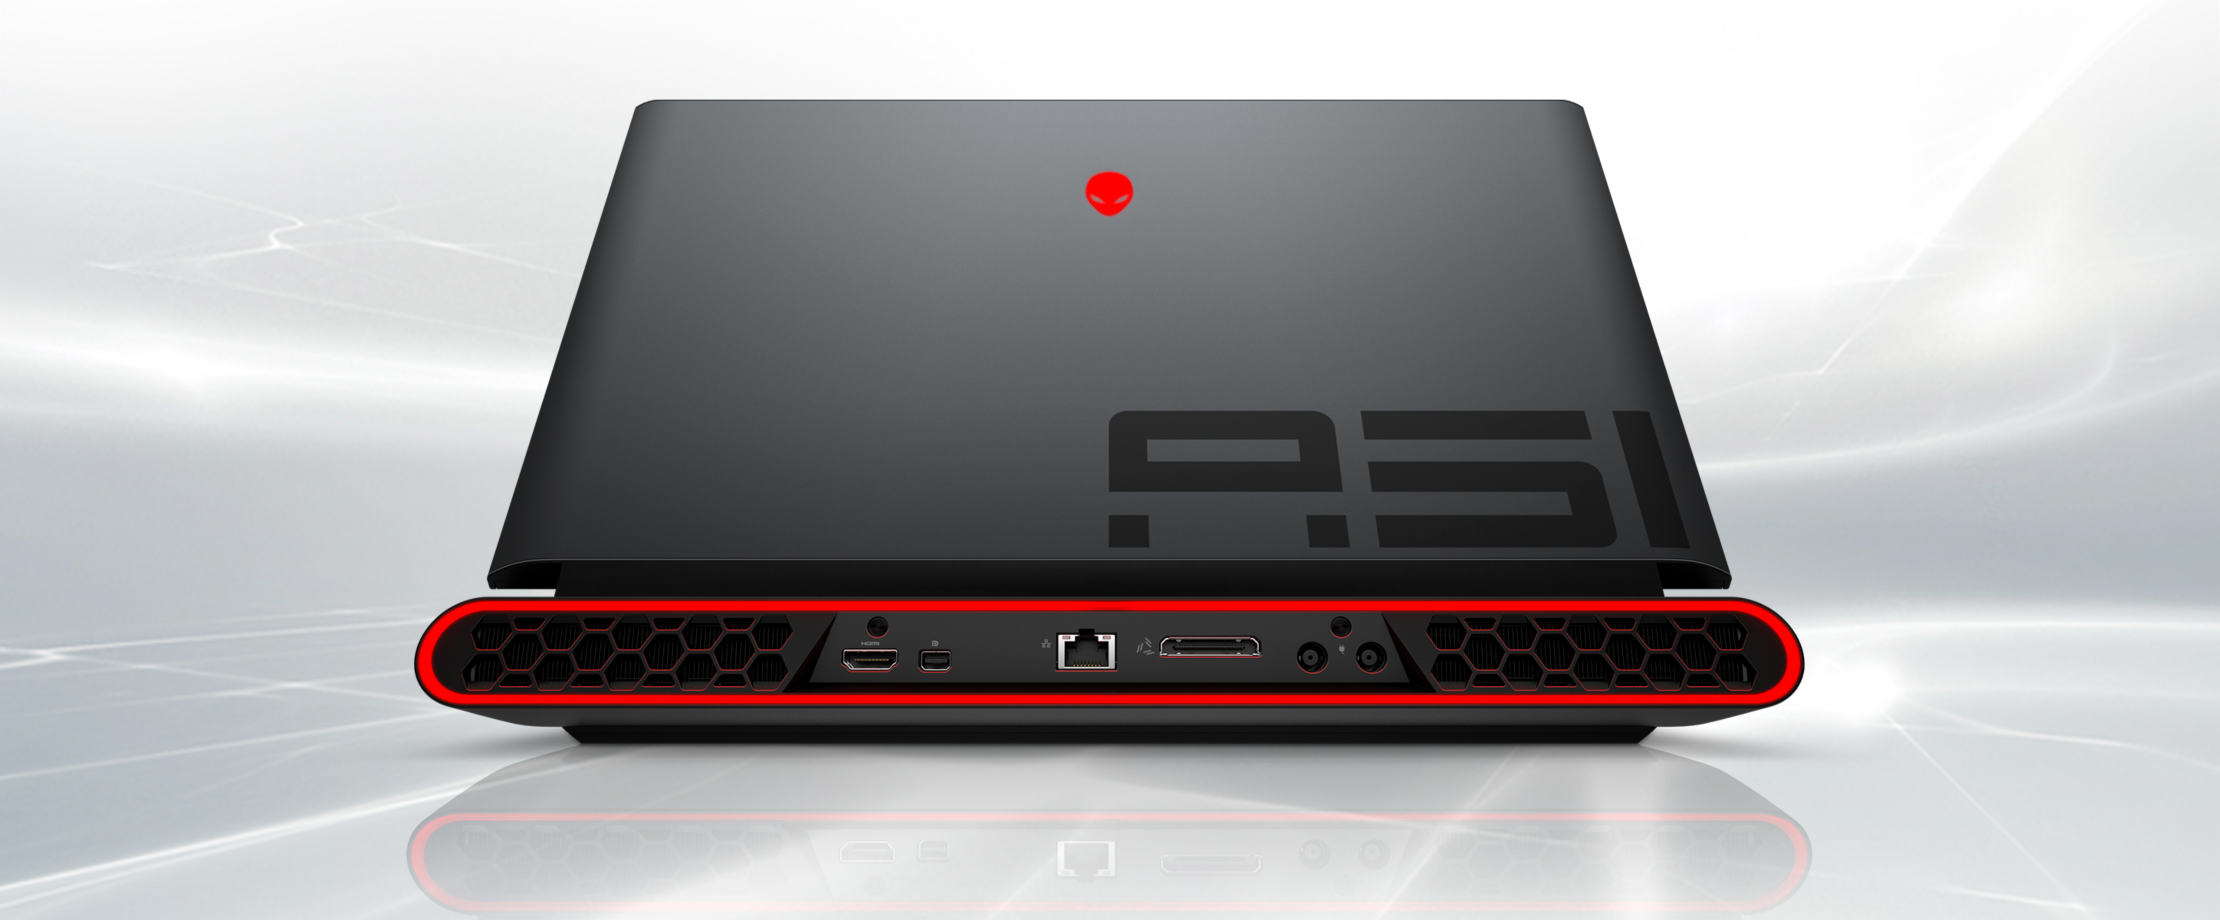 laptops-alienware-area-51m-html5-thumb-gallery-power-1.png